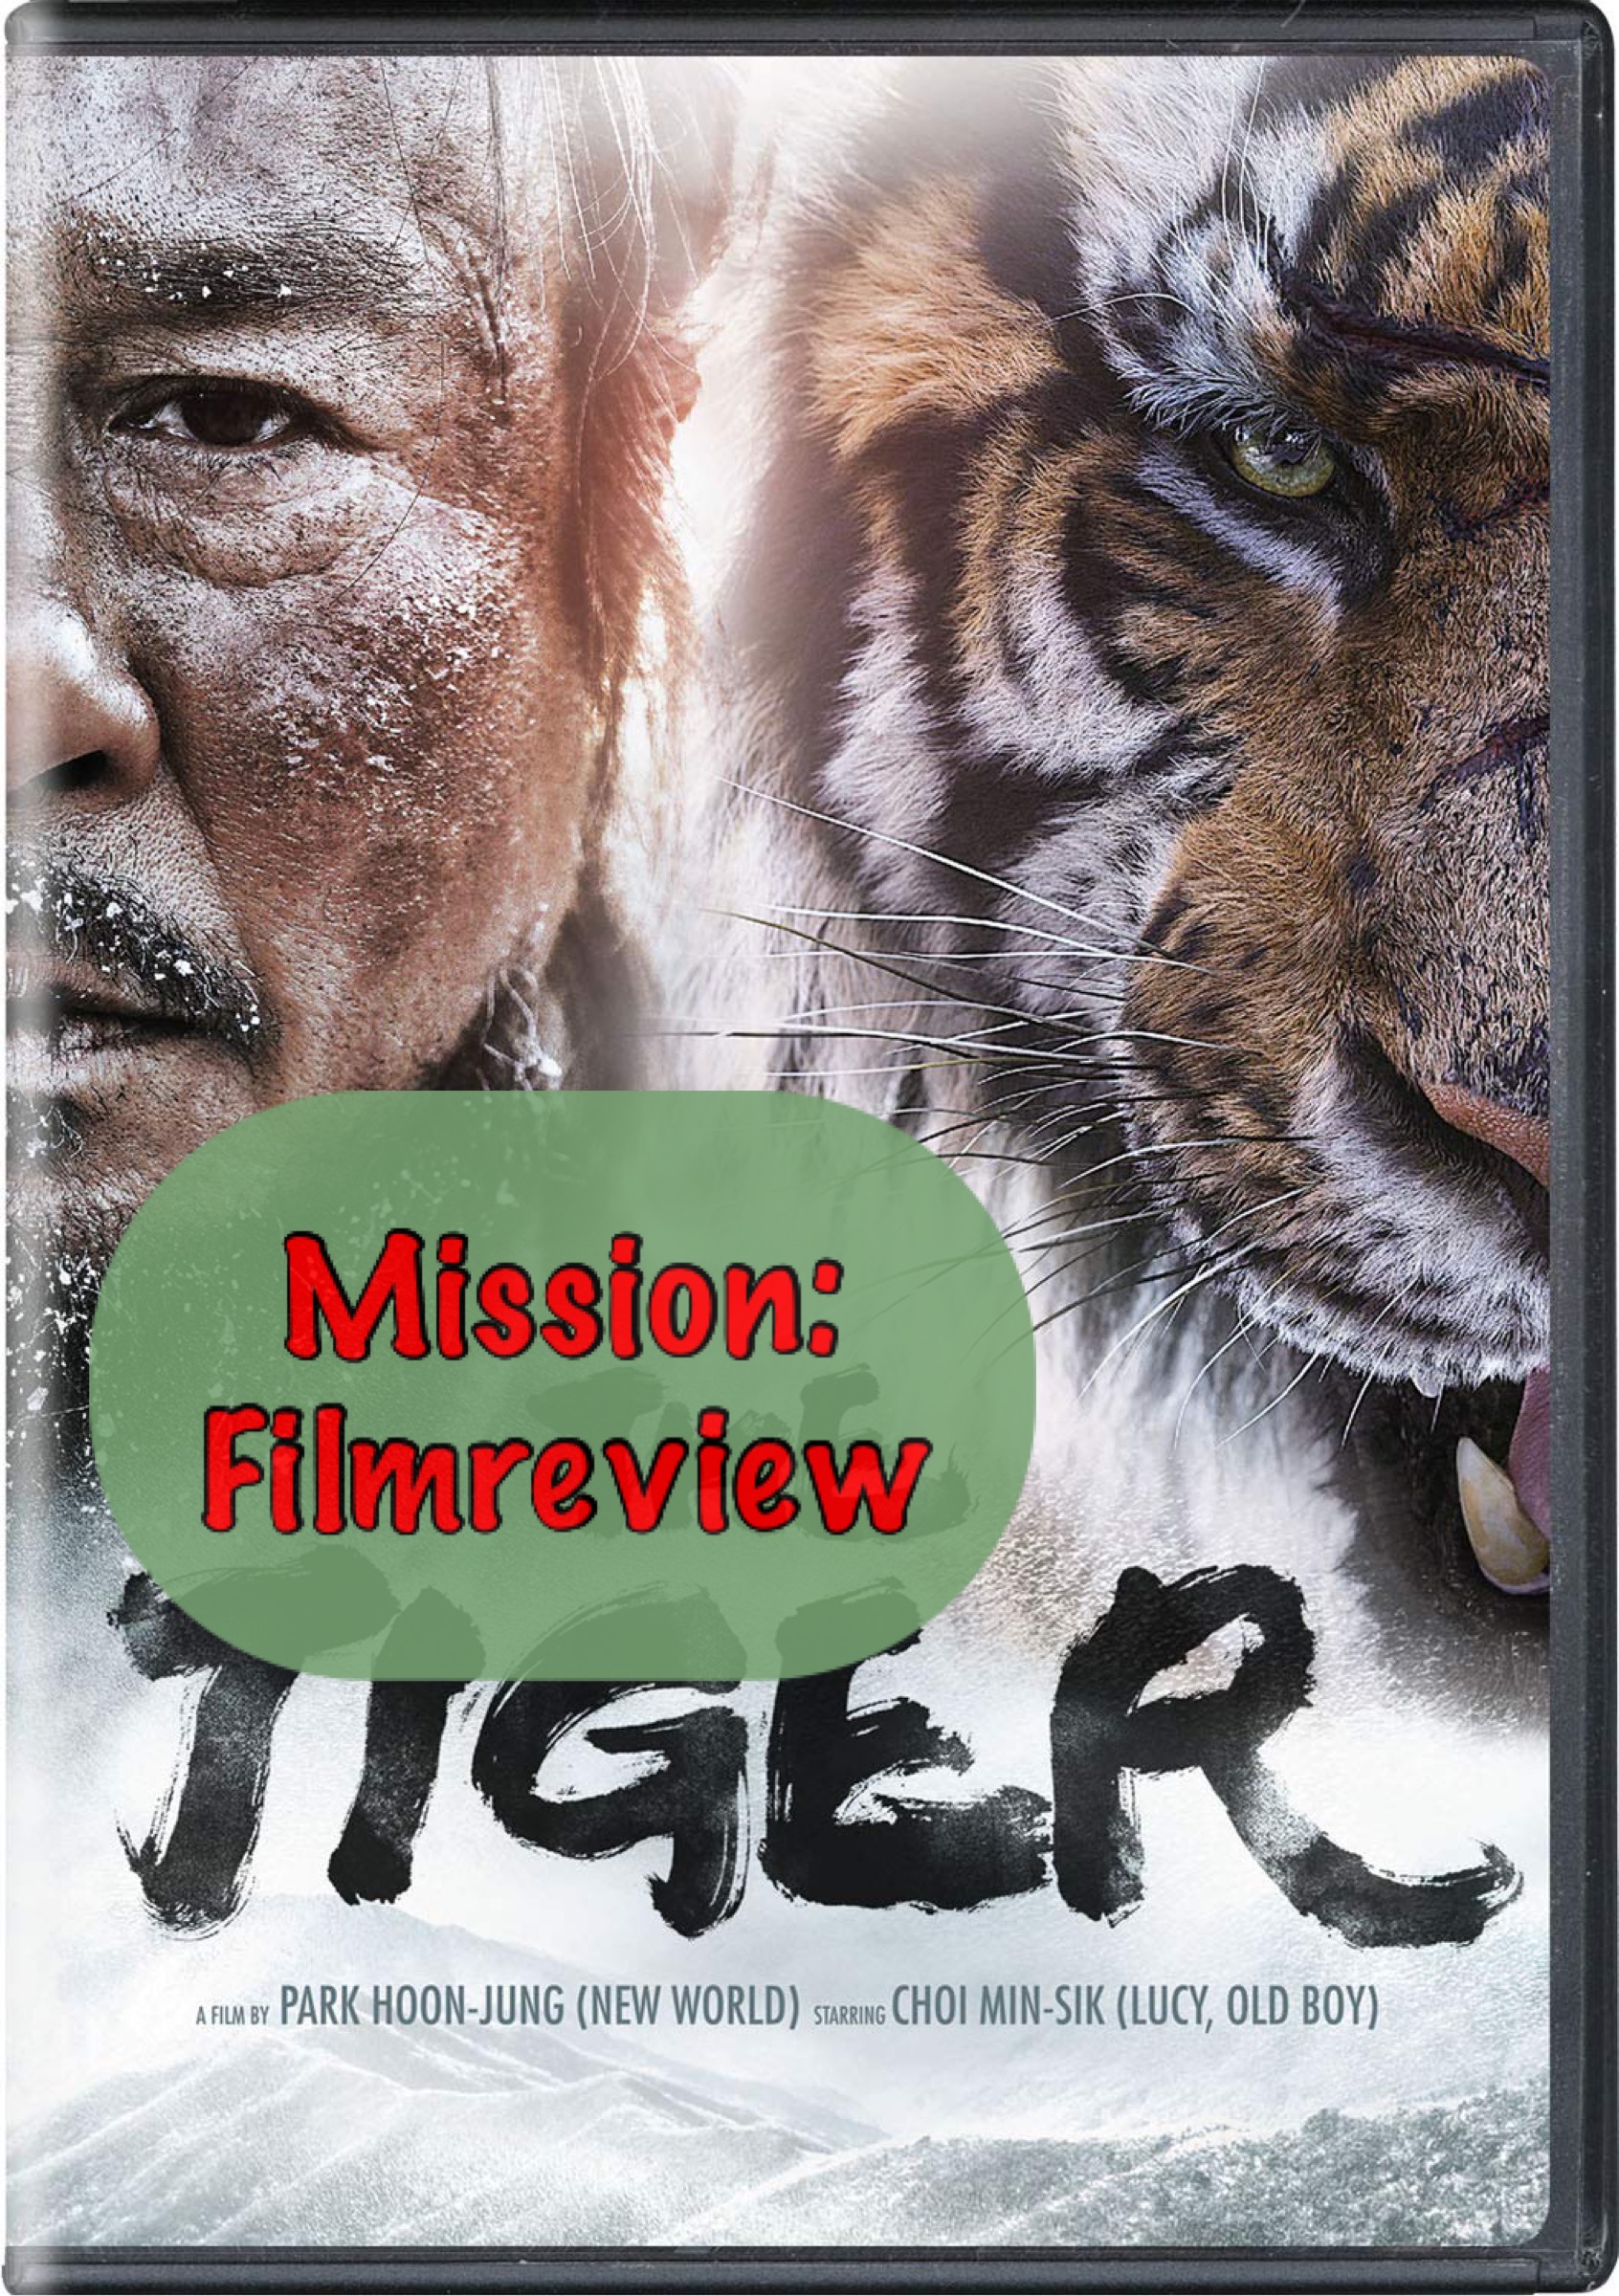 Mission: Filmreview #1 – THE TIGER